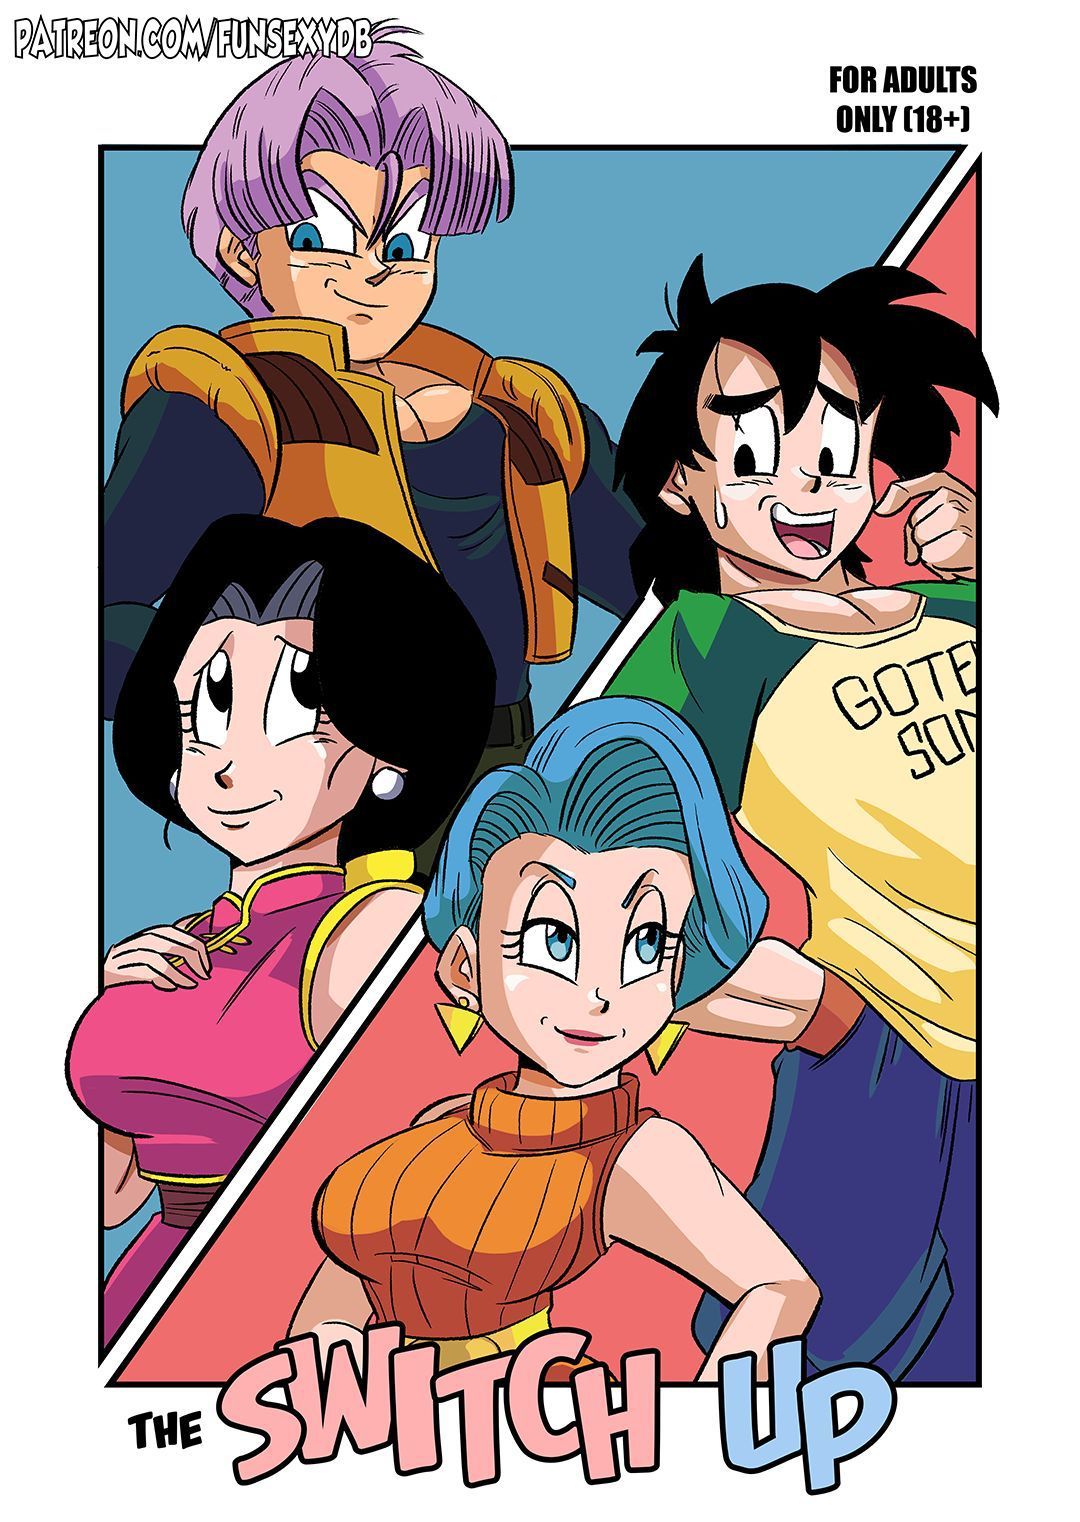 The Switch Up (Dragon Ball Z) by Funsexydb page 1